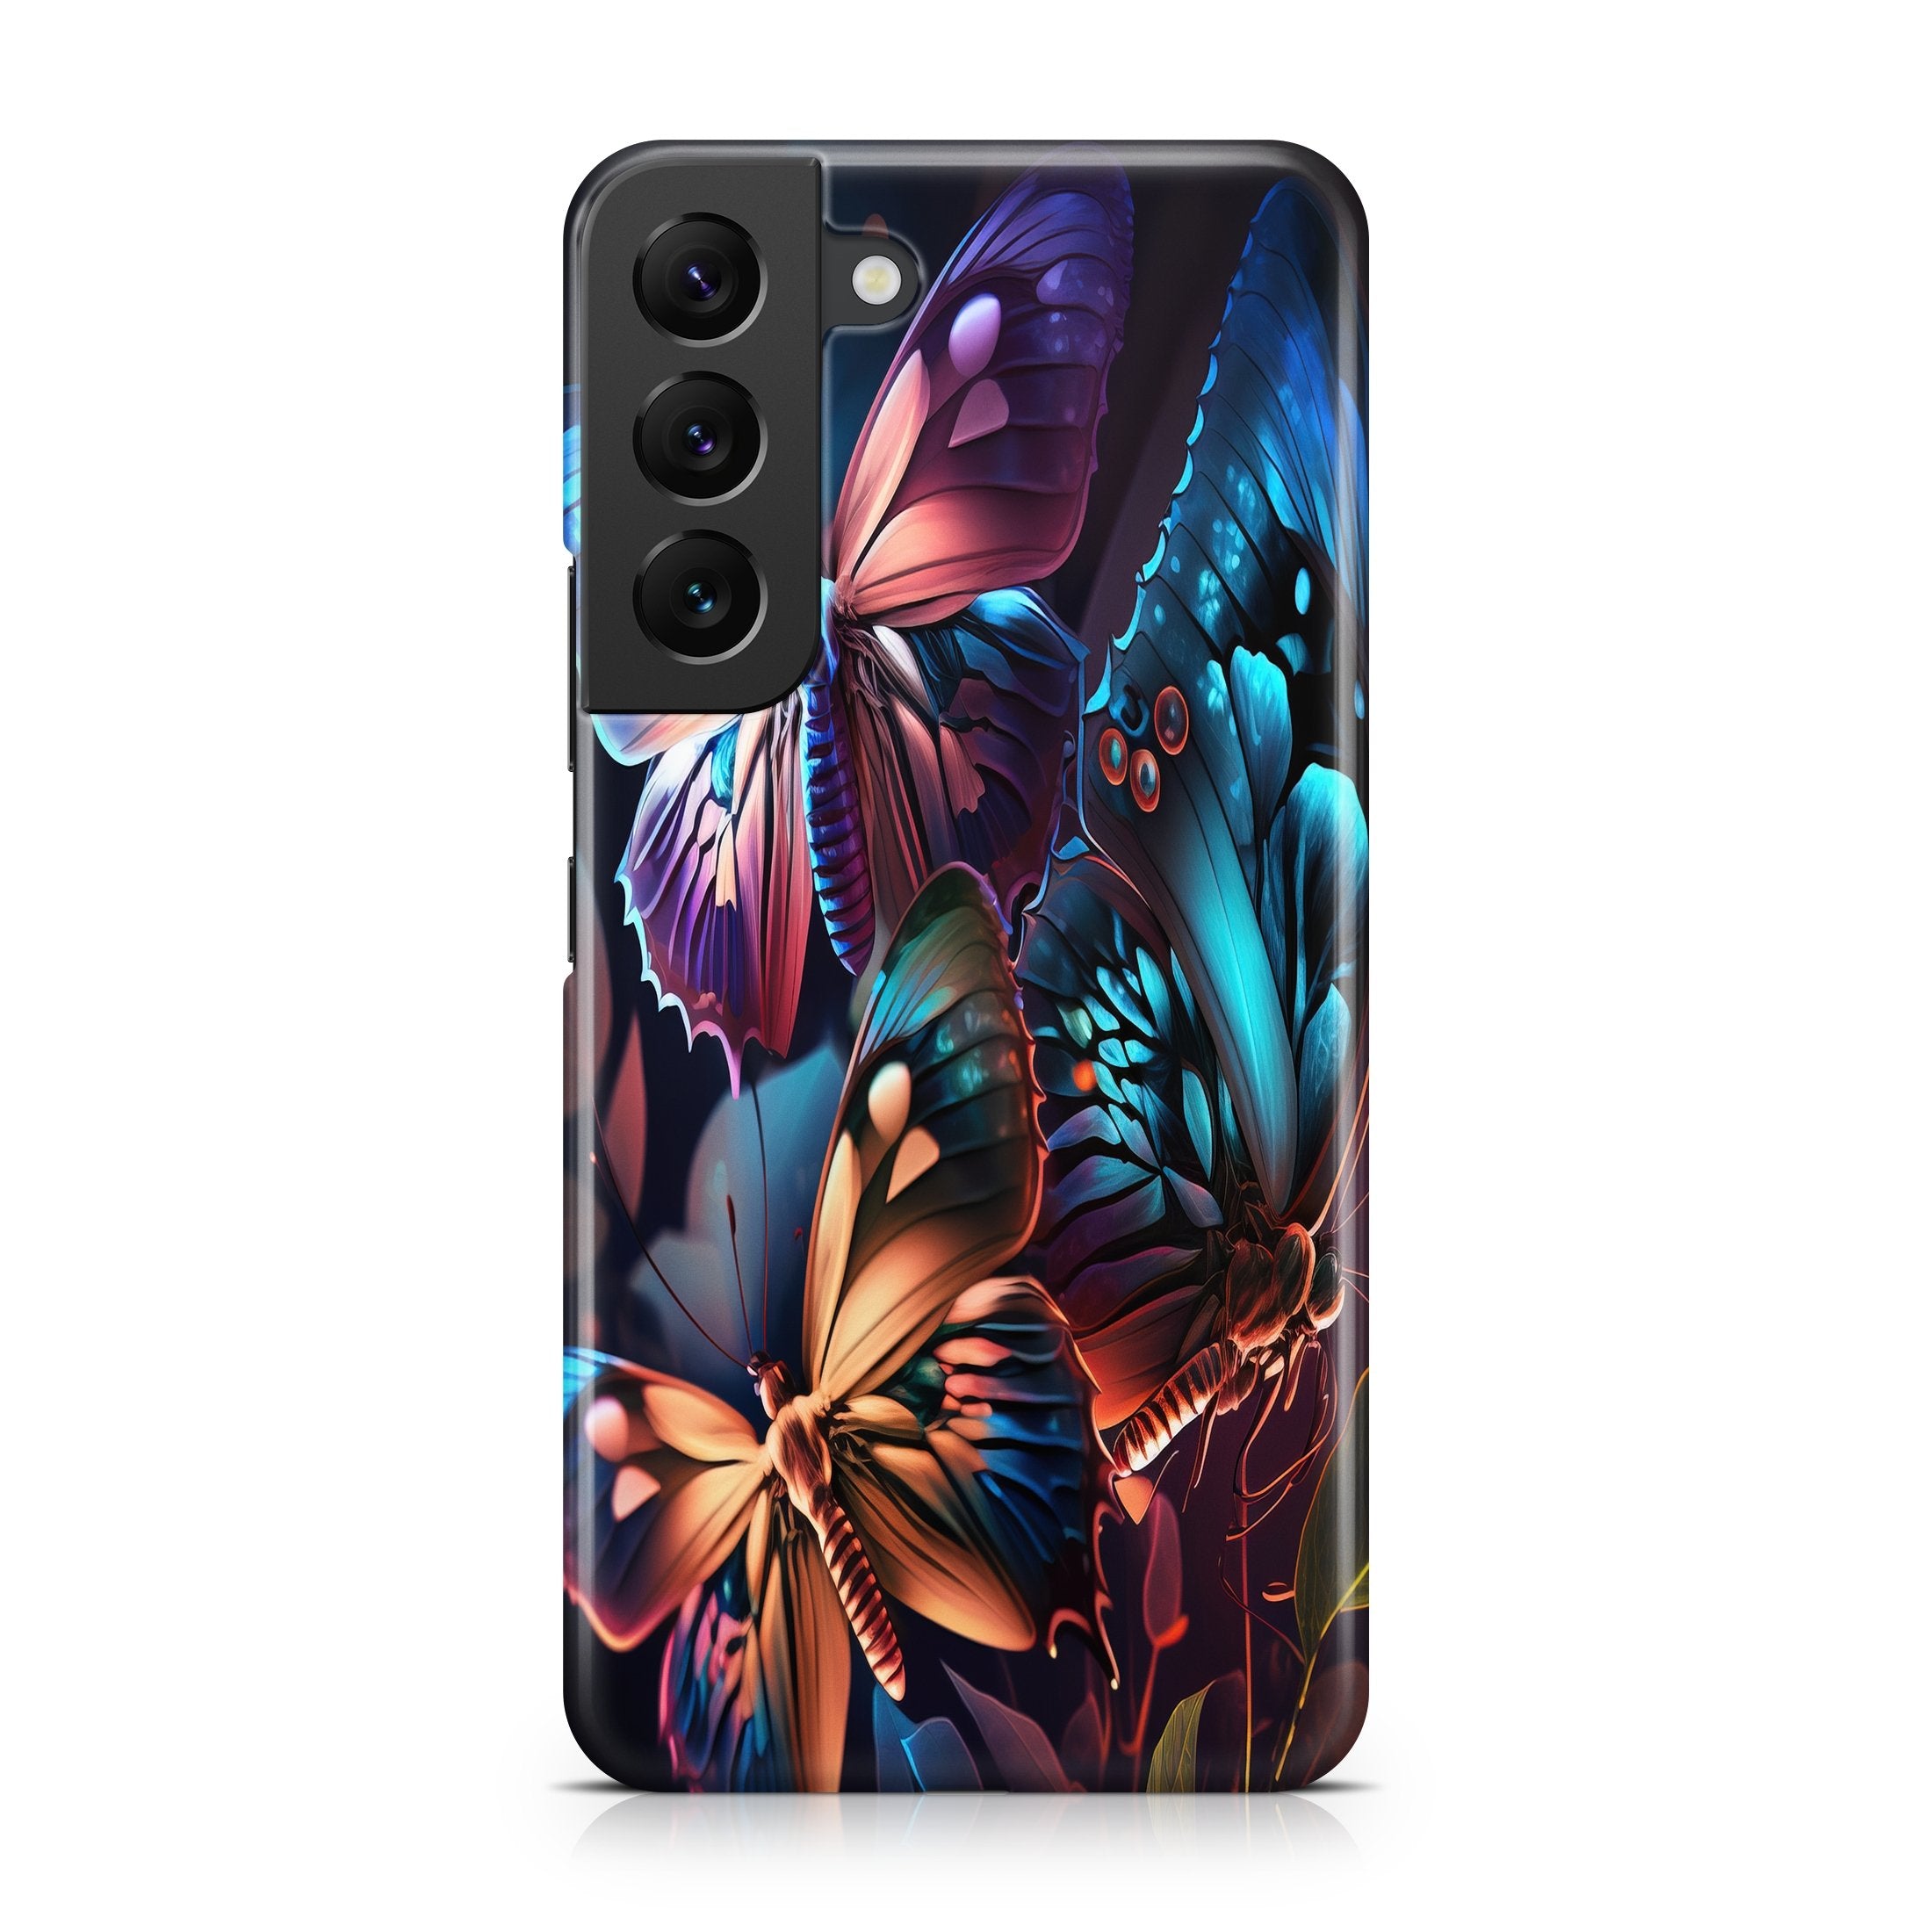 Shadow Butterflies - Samsung phone case designs by CaseSwagger